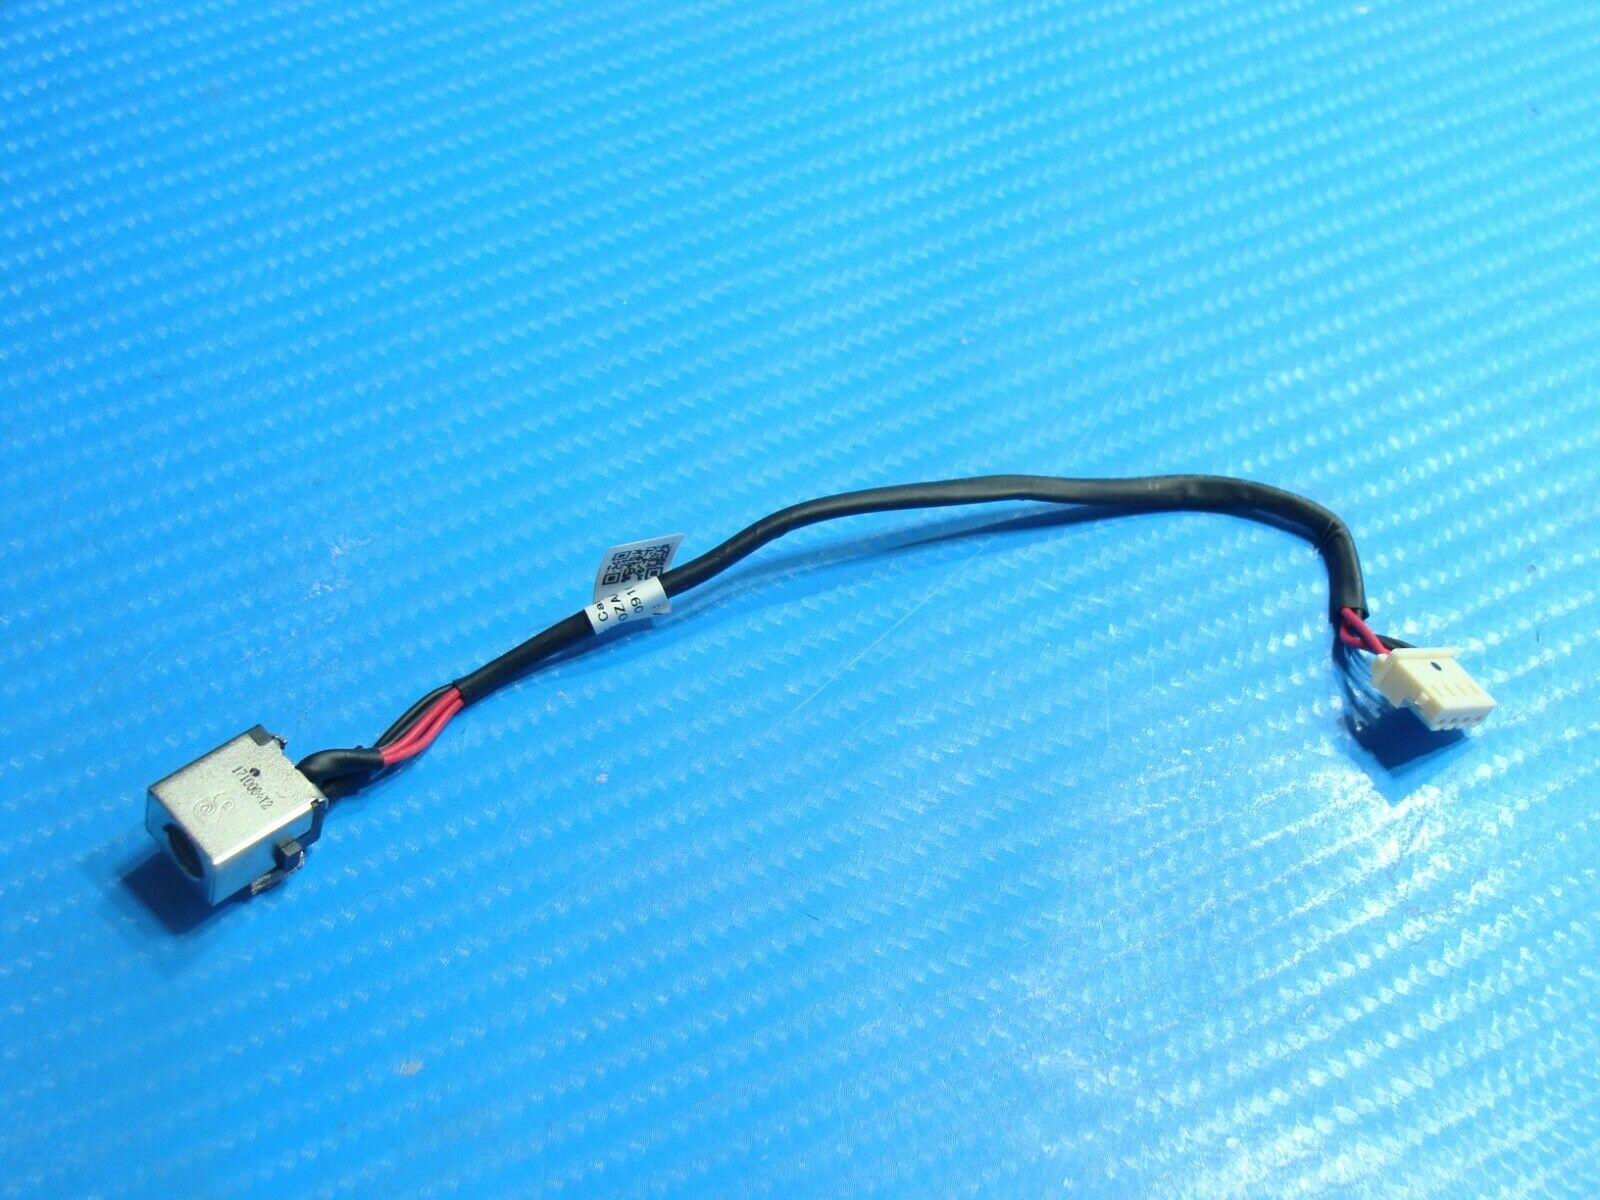 Acer Aspire E15 15.6" E5-575-33BM Genuine DC IN Power Jack w/ Cable dd0zaaad000 Tested Laptop Parts - Replacement Parts for Repairs